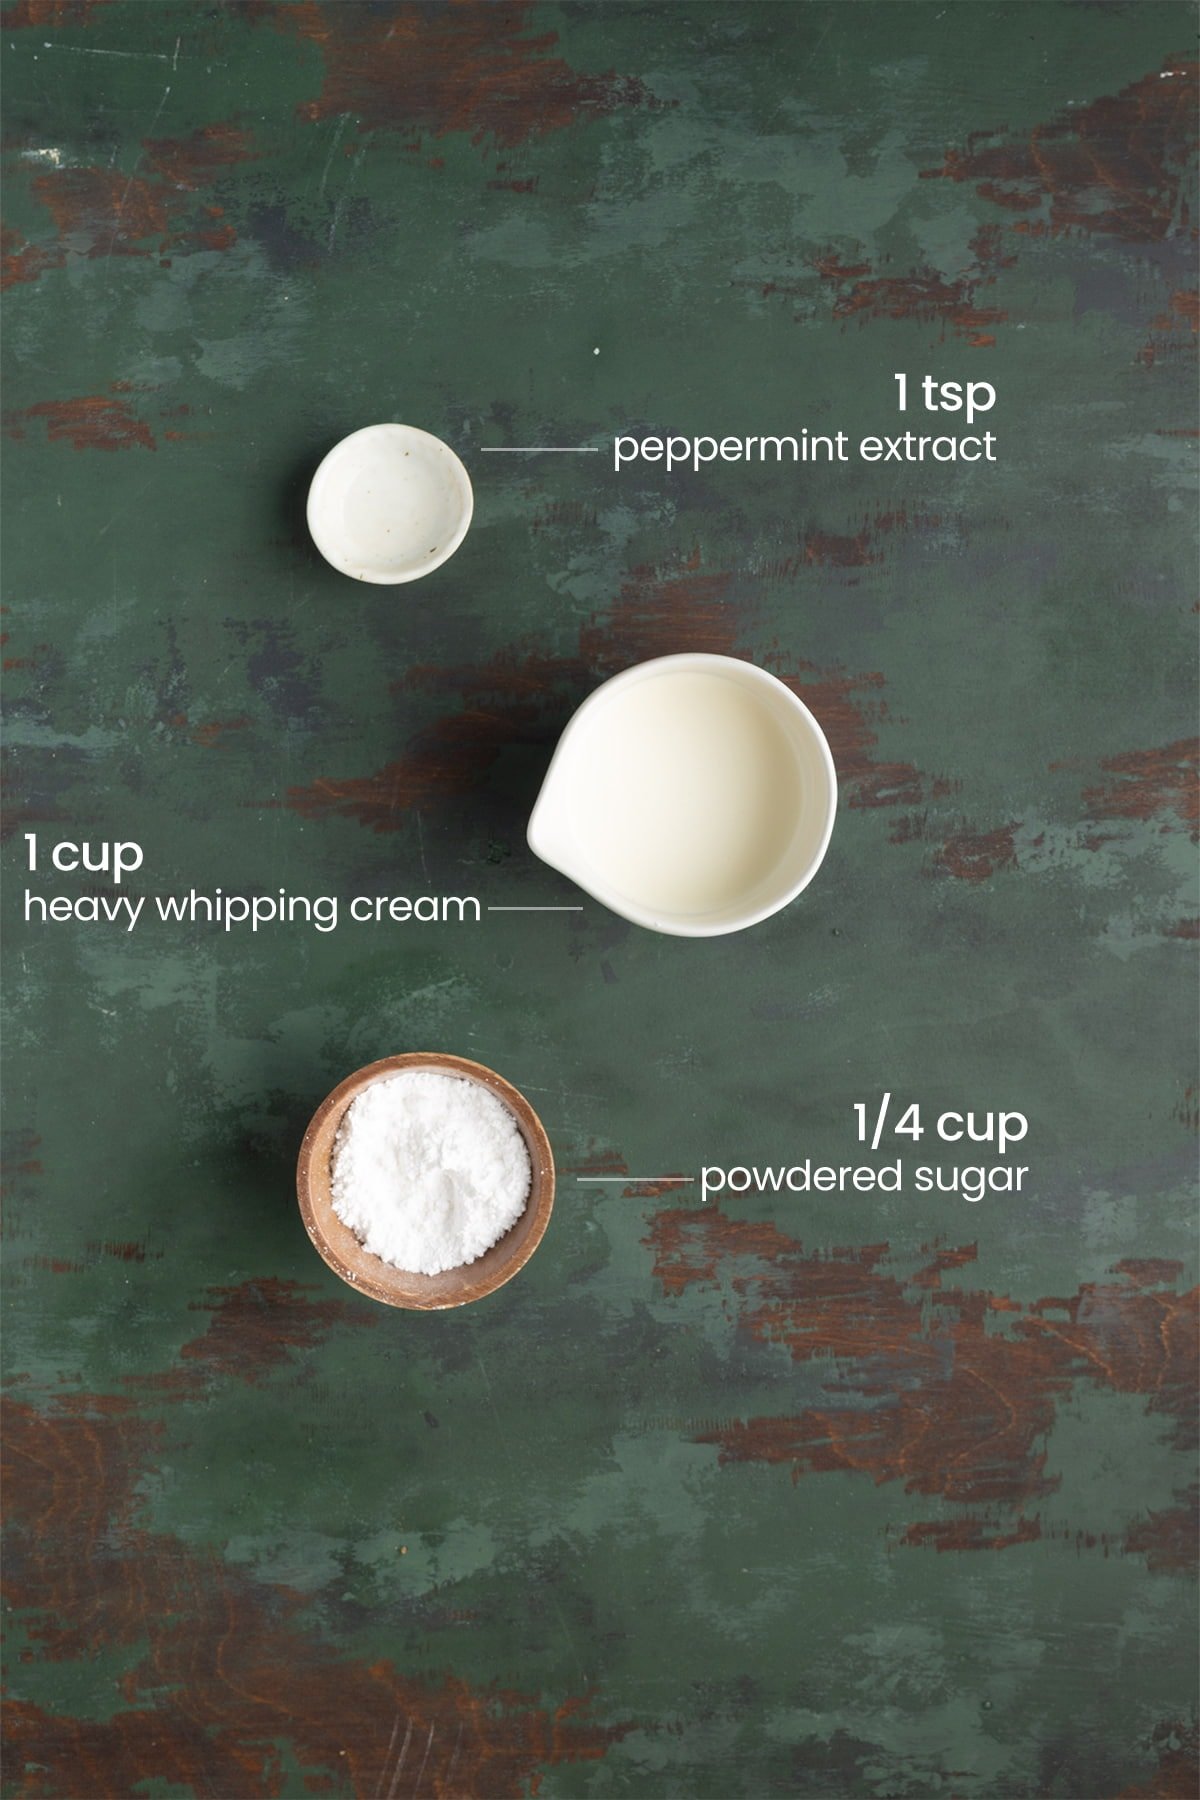 ingredients for peppermint whipped cream - peppermint extract, heavy whipping cream, powdered sugar